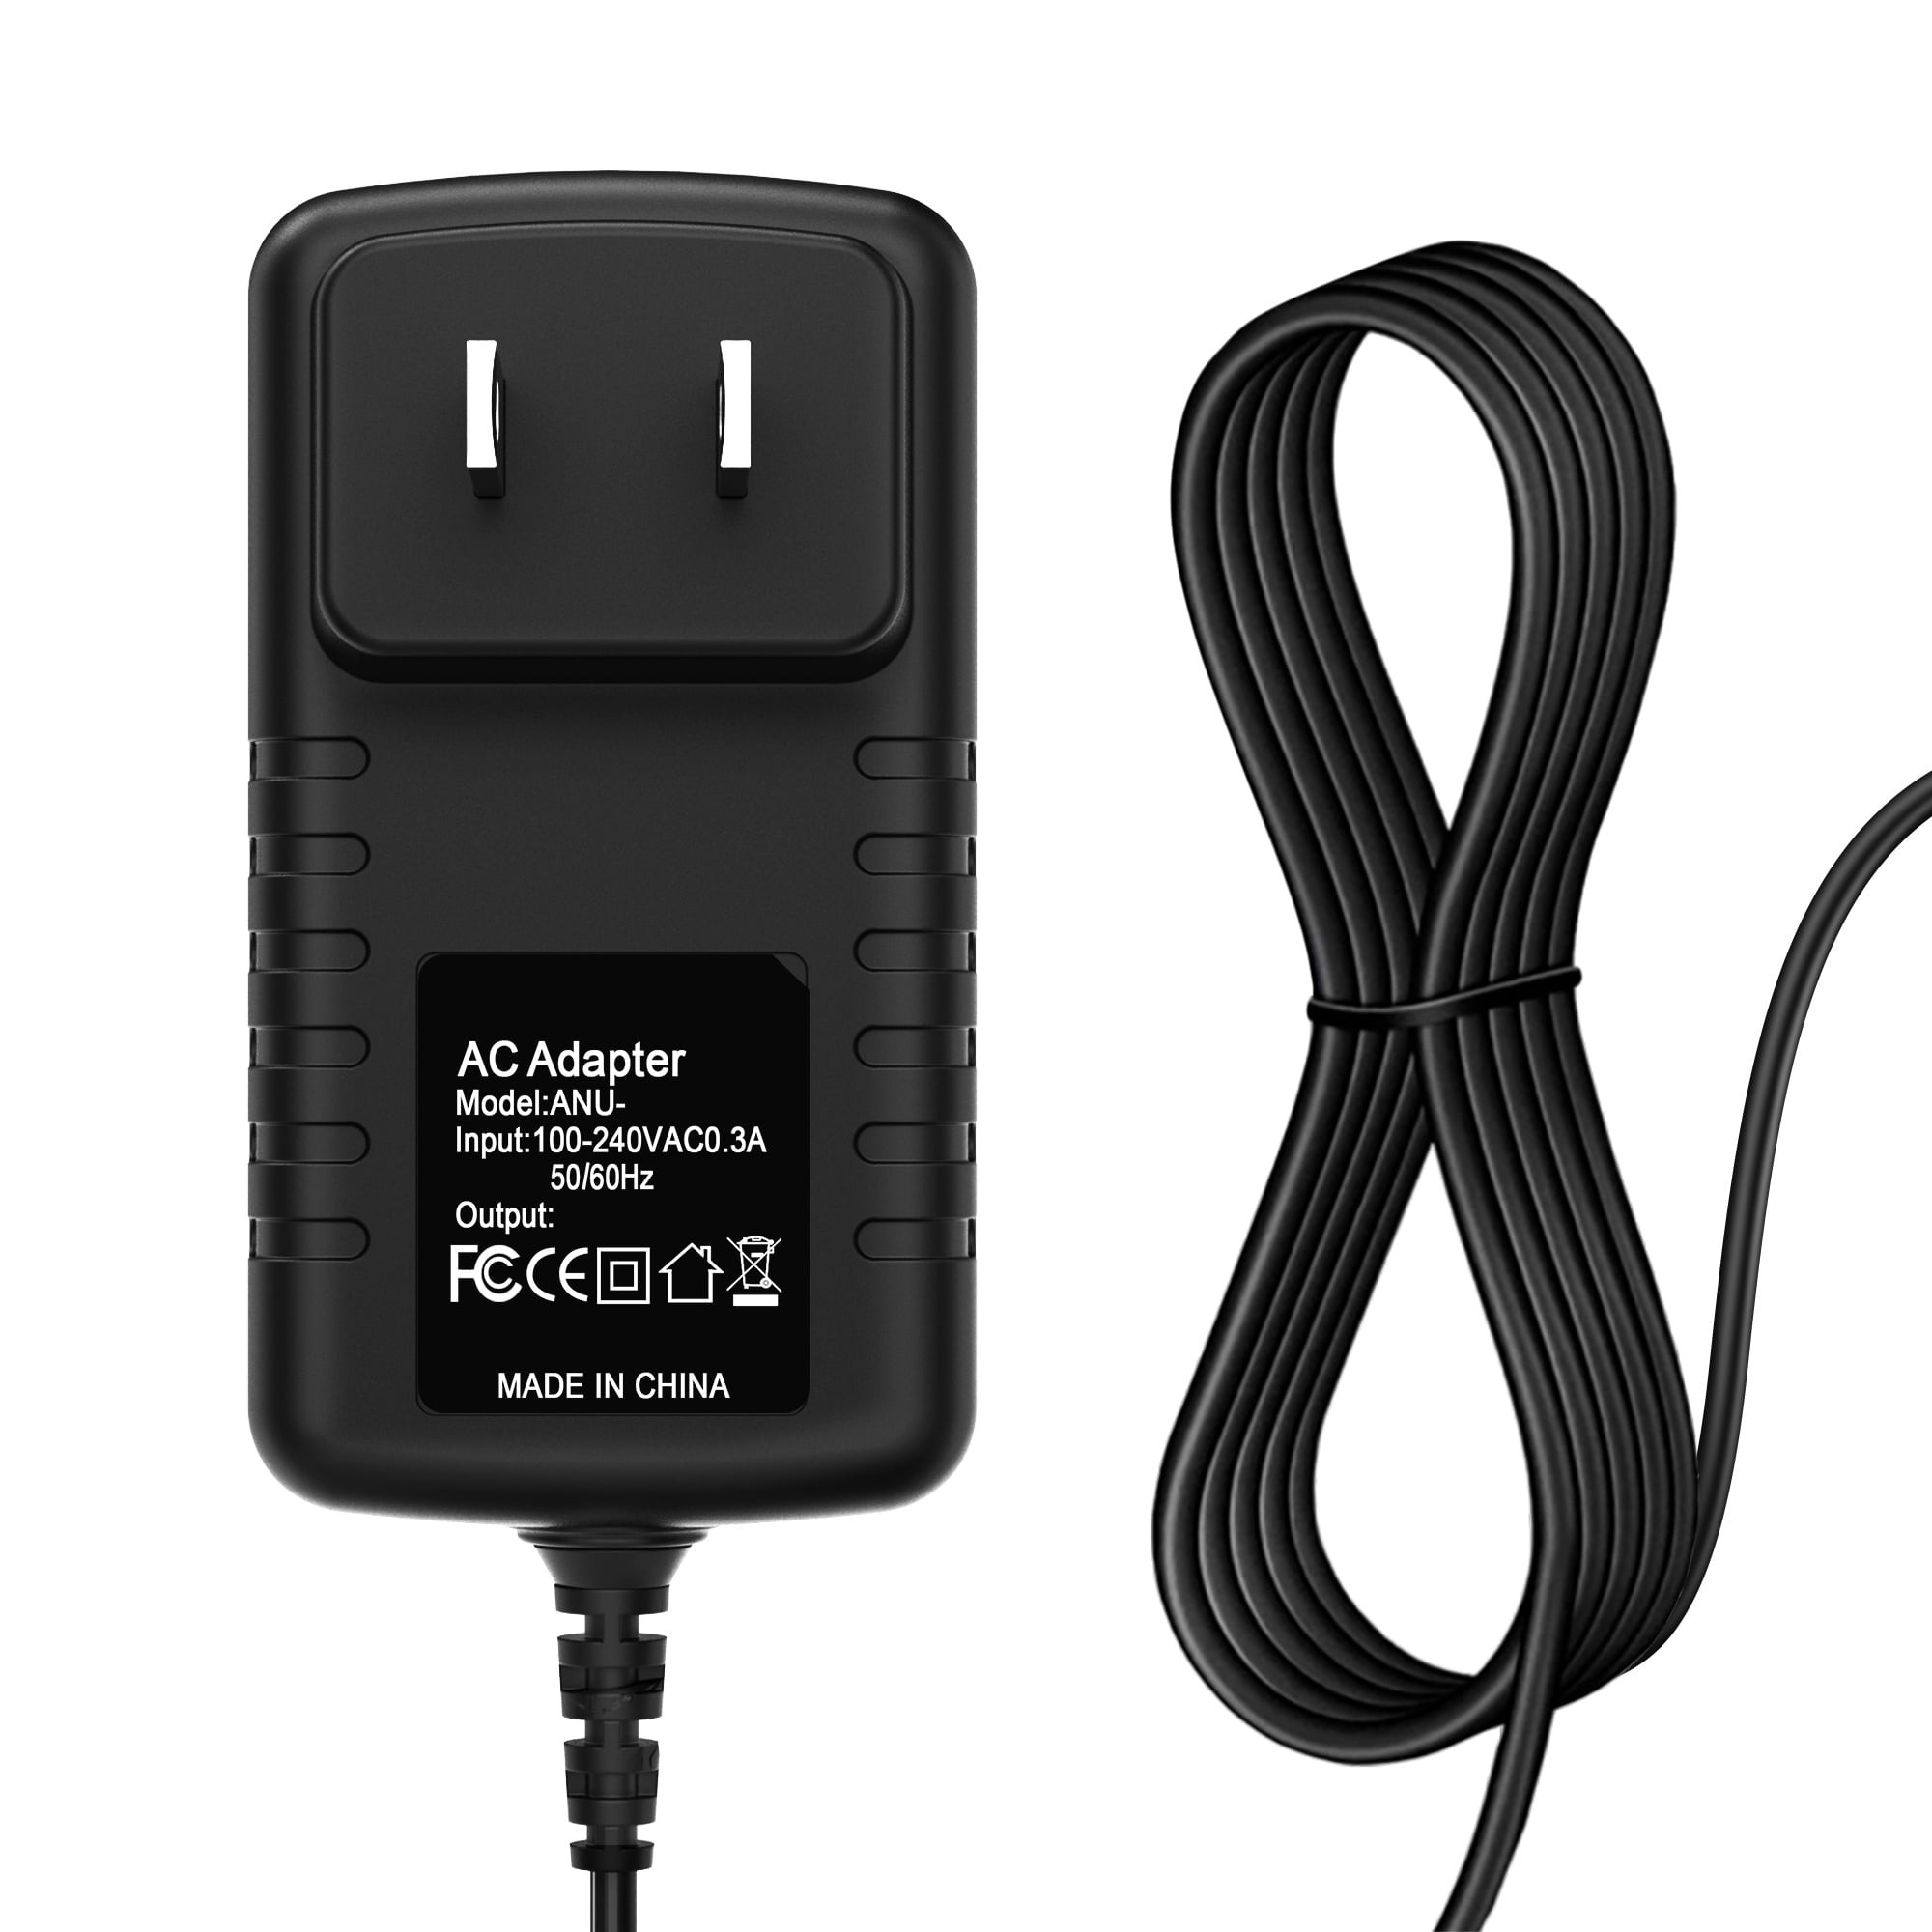 K-MAINS AC DC 6V AC Adapter Power Supply Cord Wall Charger Replacement for SONY  AC-D4L ACD4L Mains - Walmart.com